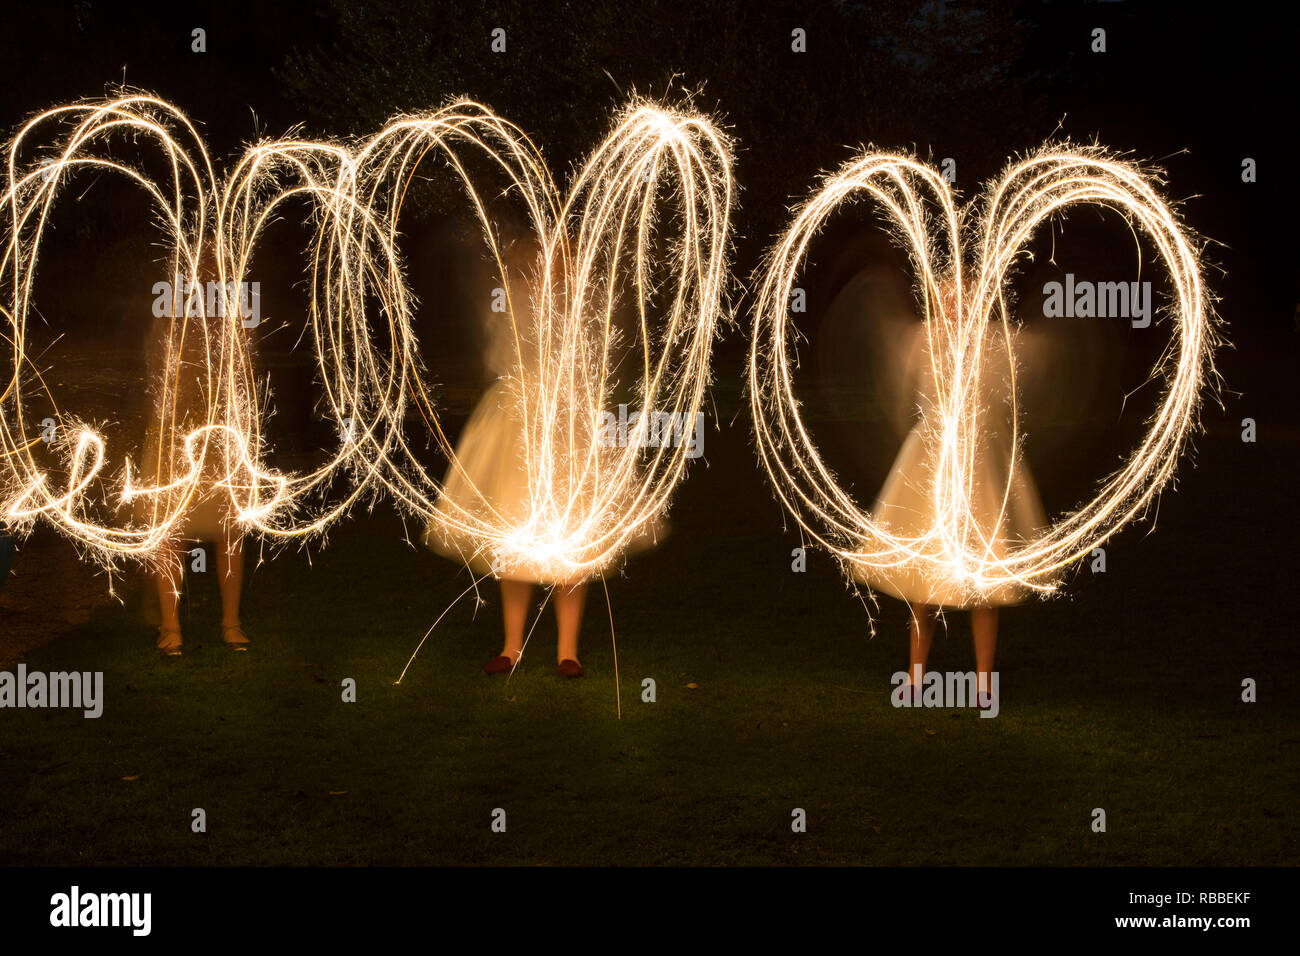 sparklers being whizzed around on a wedding day in the semi dark, by wedding guests, sparkler patterns in the dark, long exposure Stock Photo